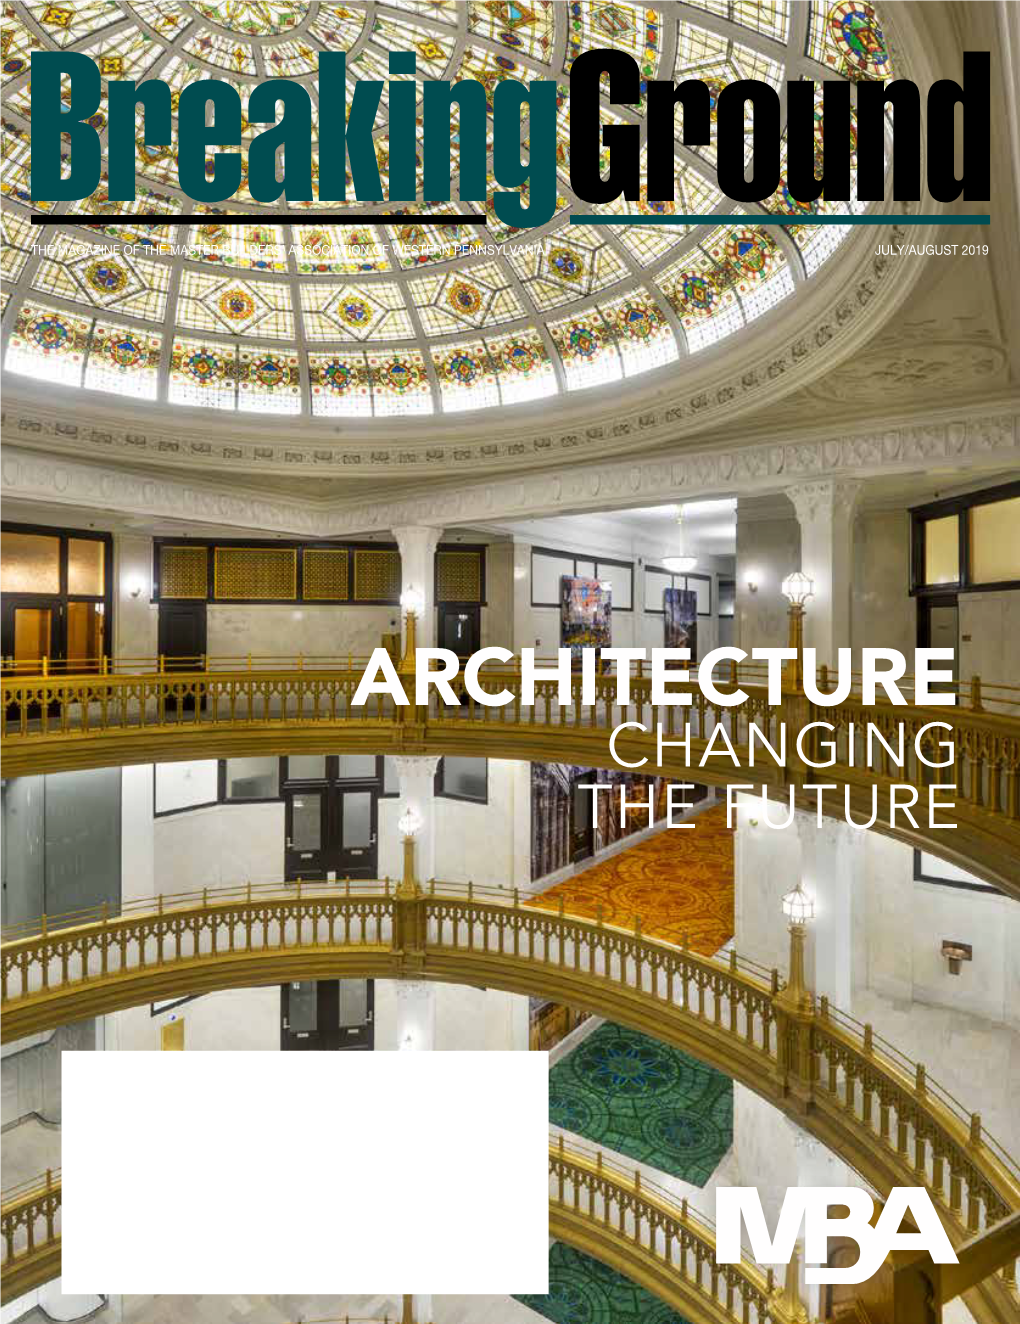 ARCHITECTURE CHANGING the FUTURE 19-07-02 PDP Ad FIN.Pdf 1 7/2/19 2:18 PM